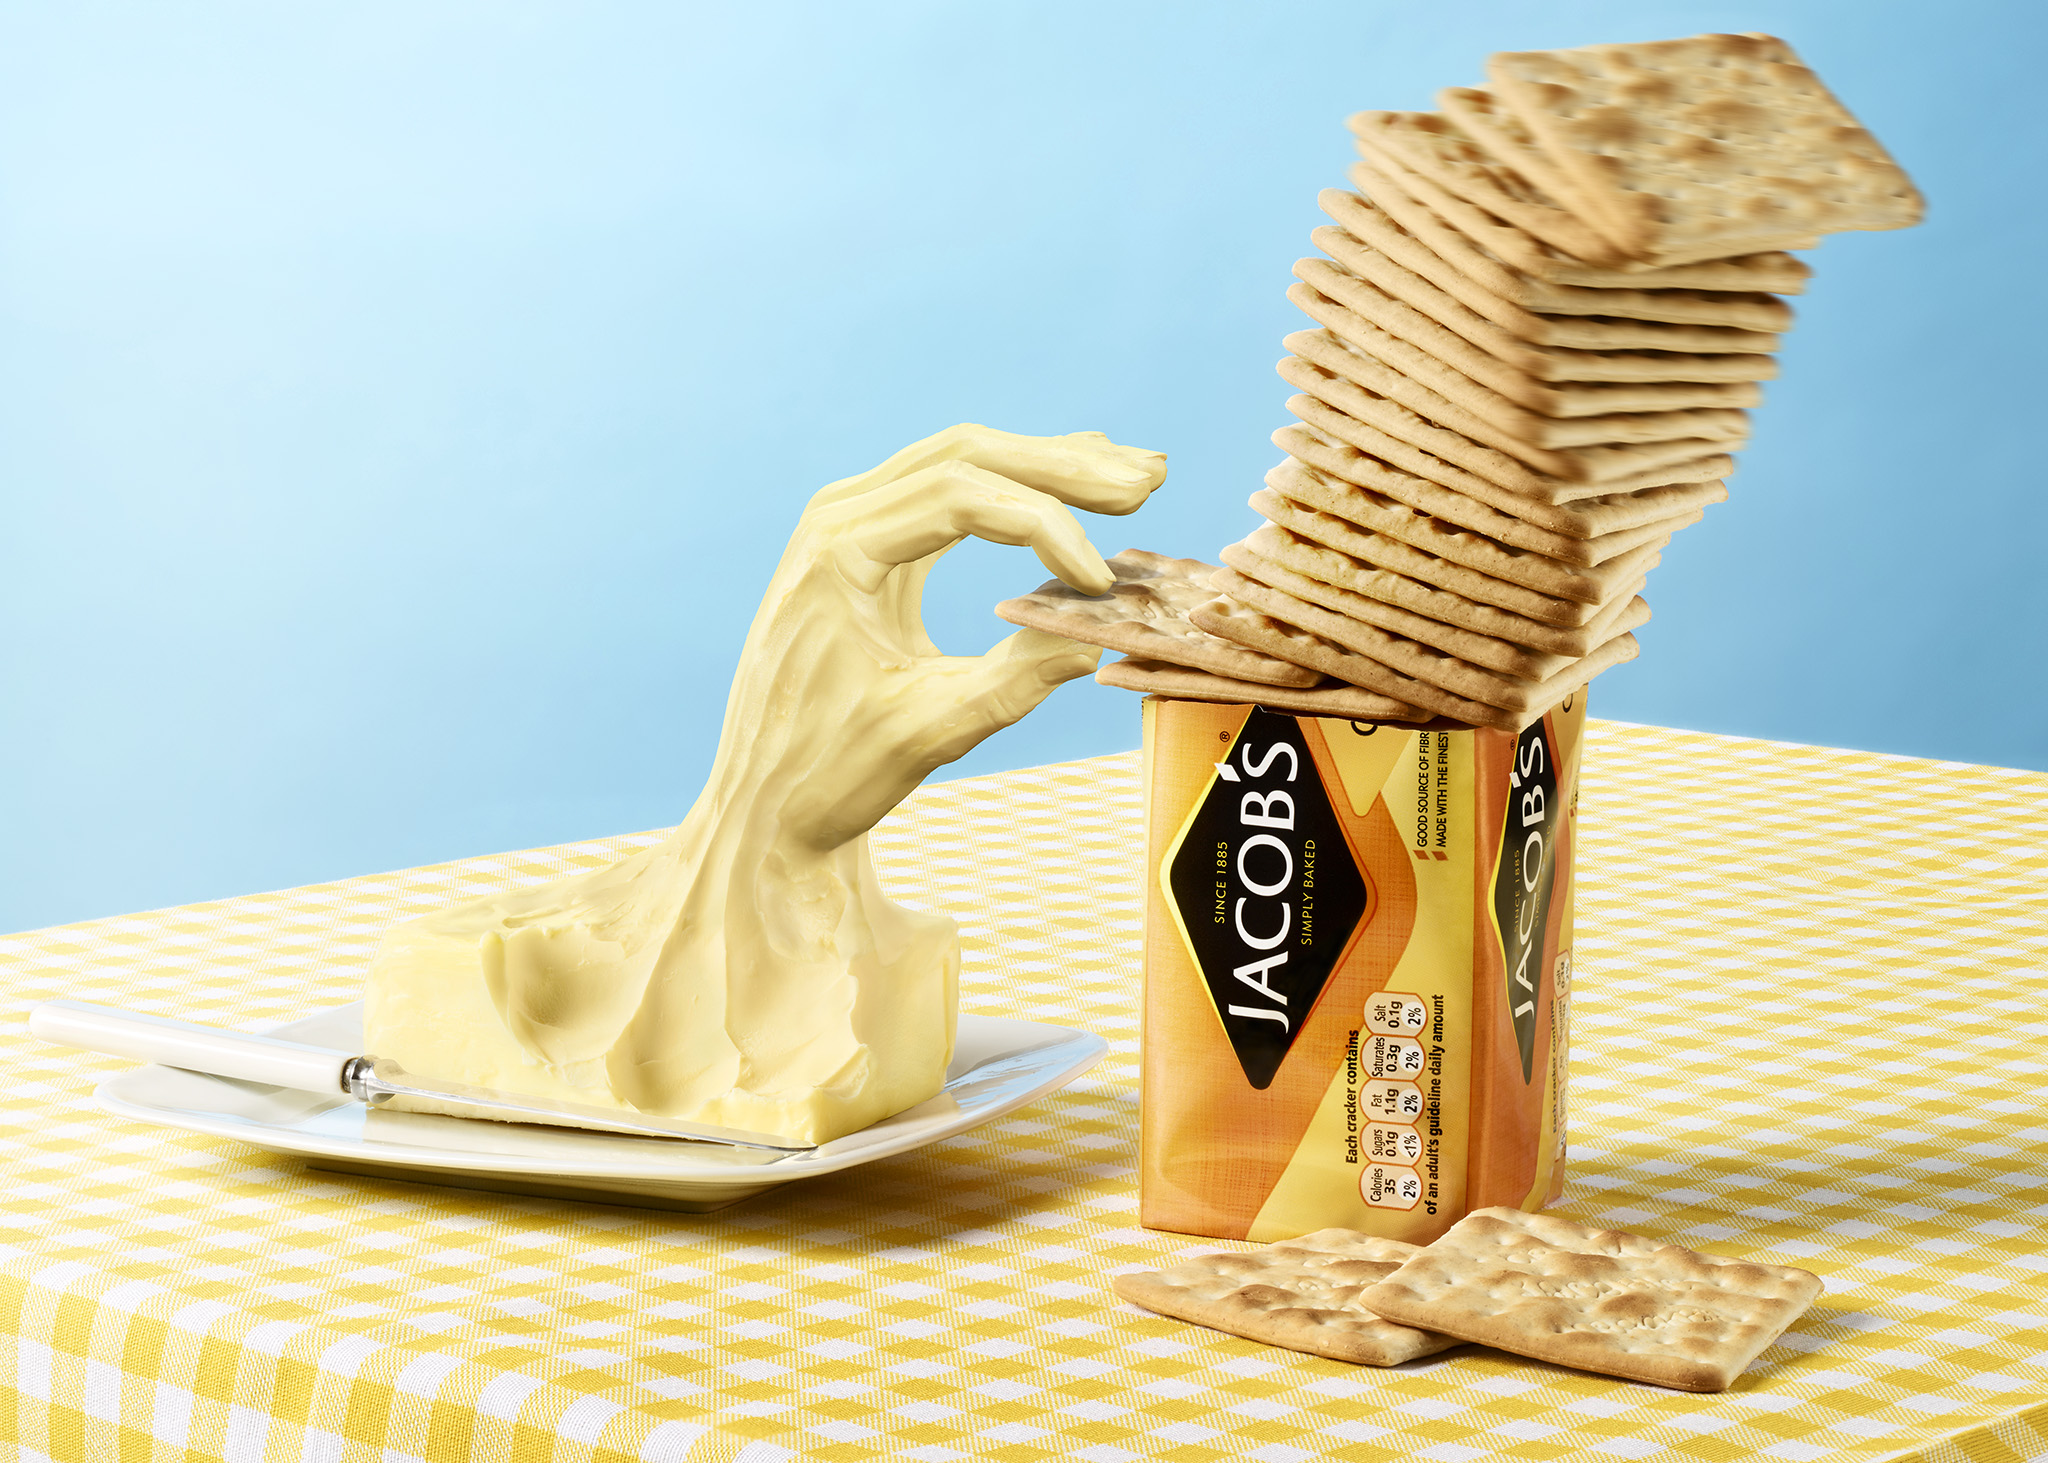 CGI imagery combined with food photography 